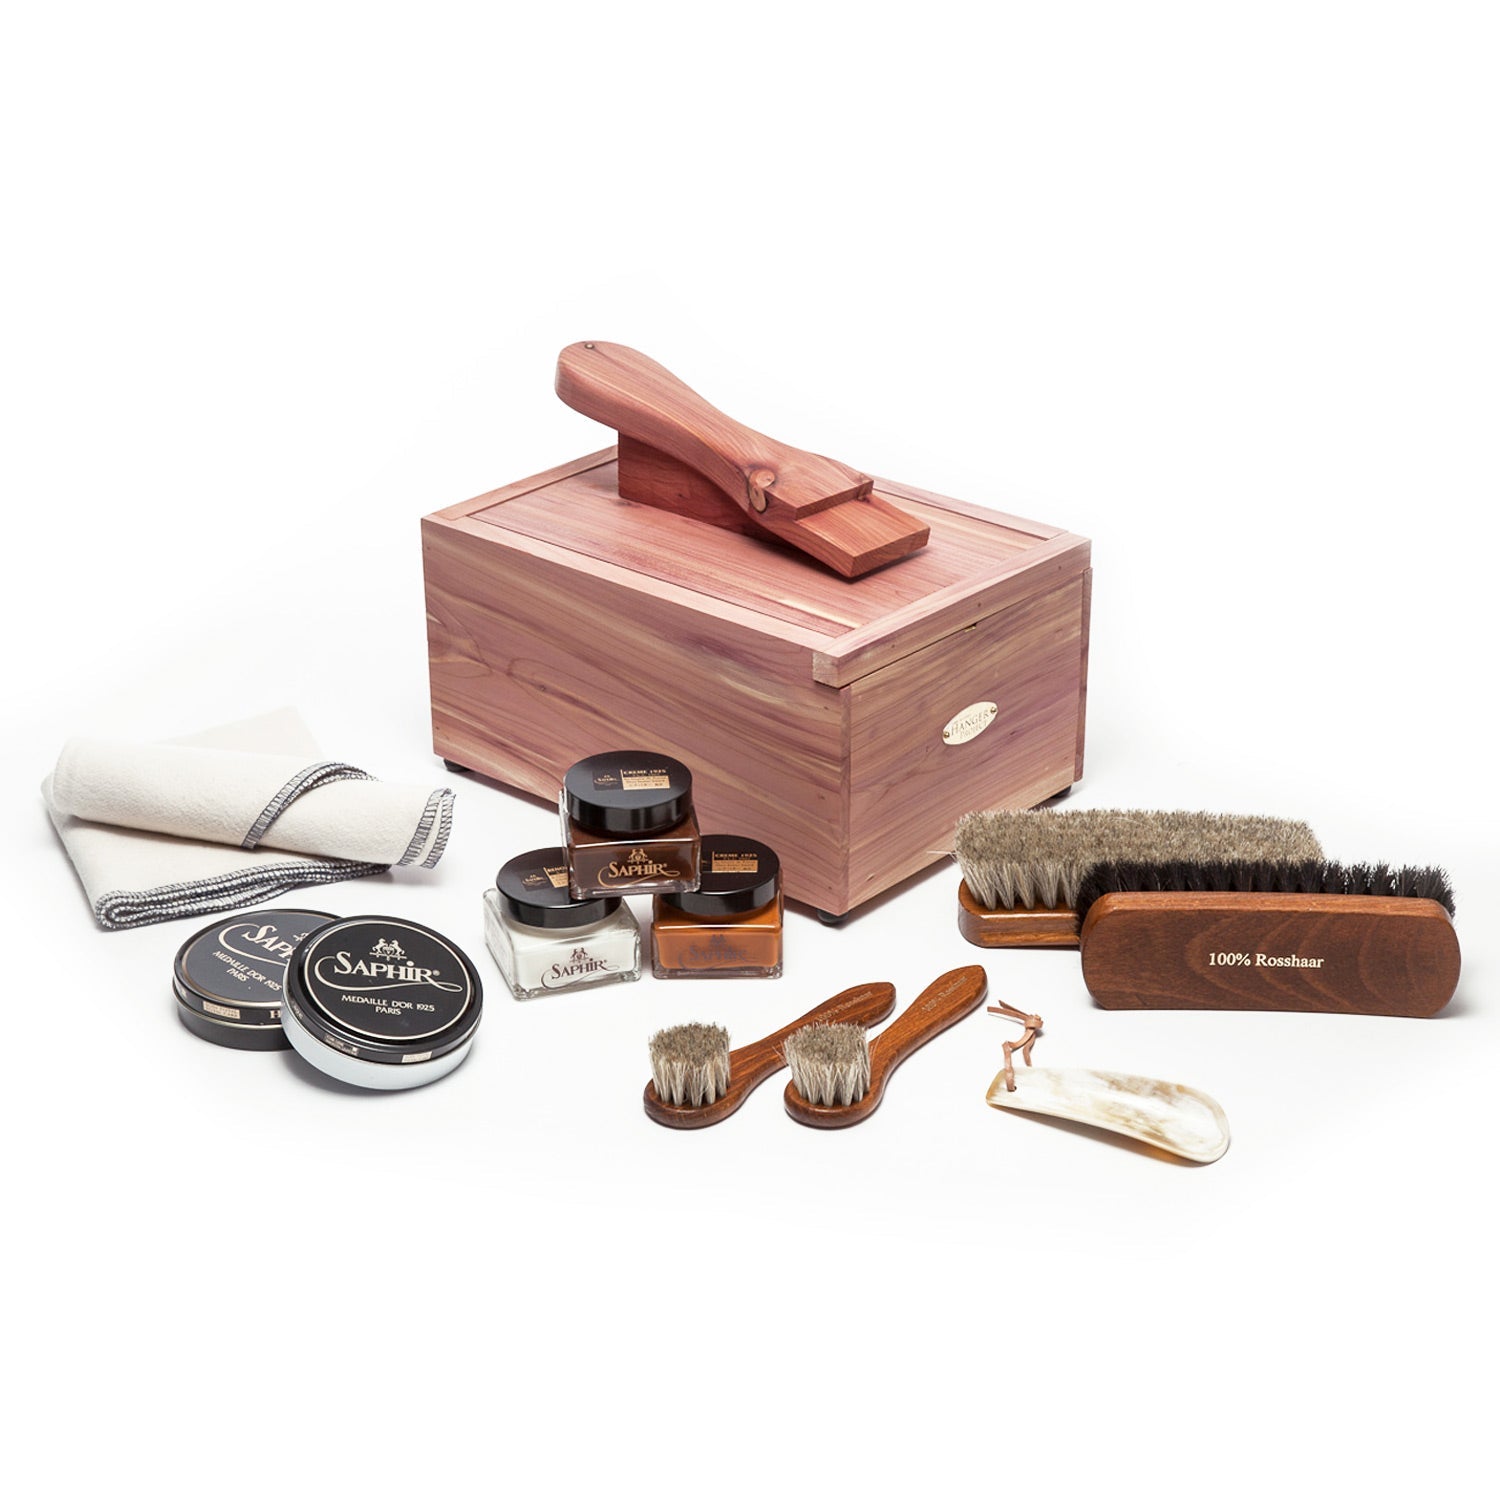 A wooden box with a Saphir Shoeshine Starter Kit (12 Piece Bundle) from KirbyAllison.com, including various polishes.